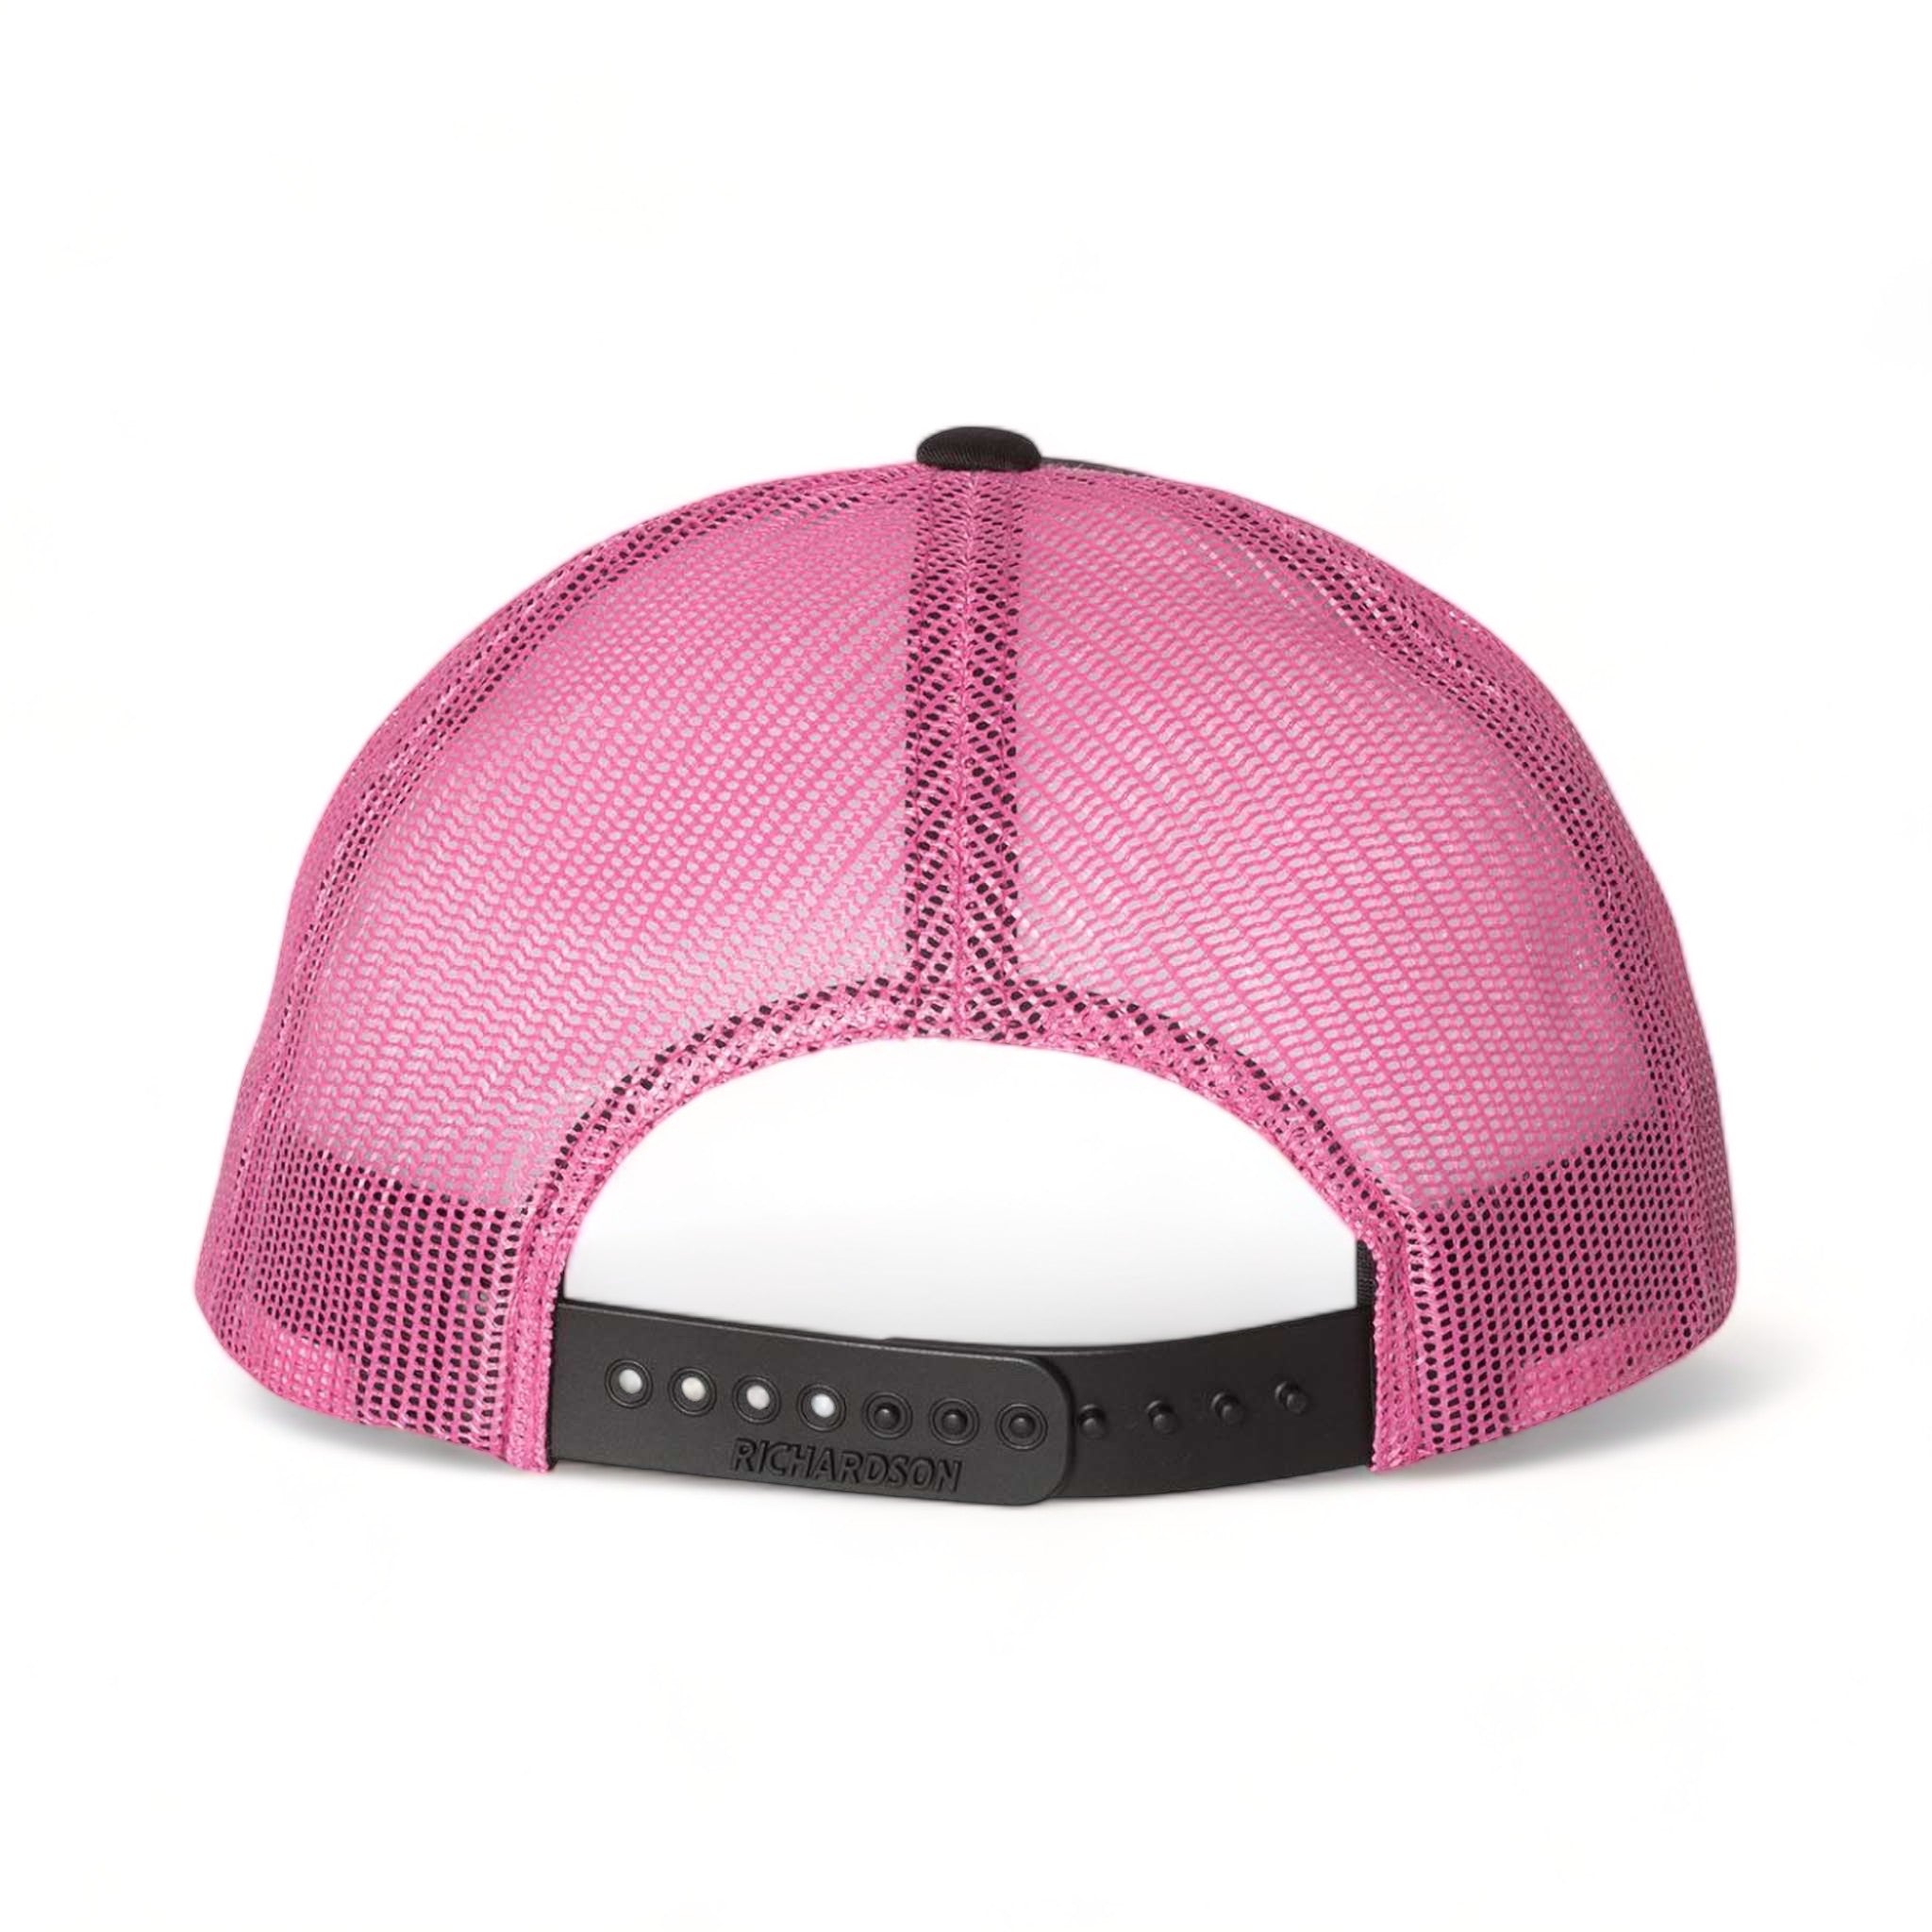 Back view of Richardson 115 custom hat in black and neon pink